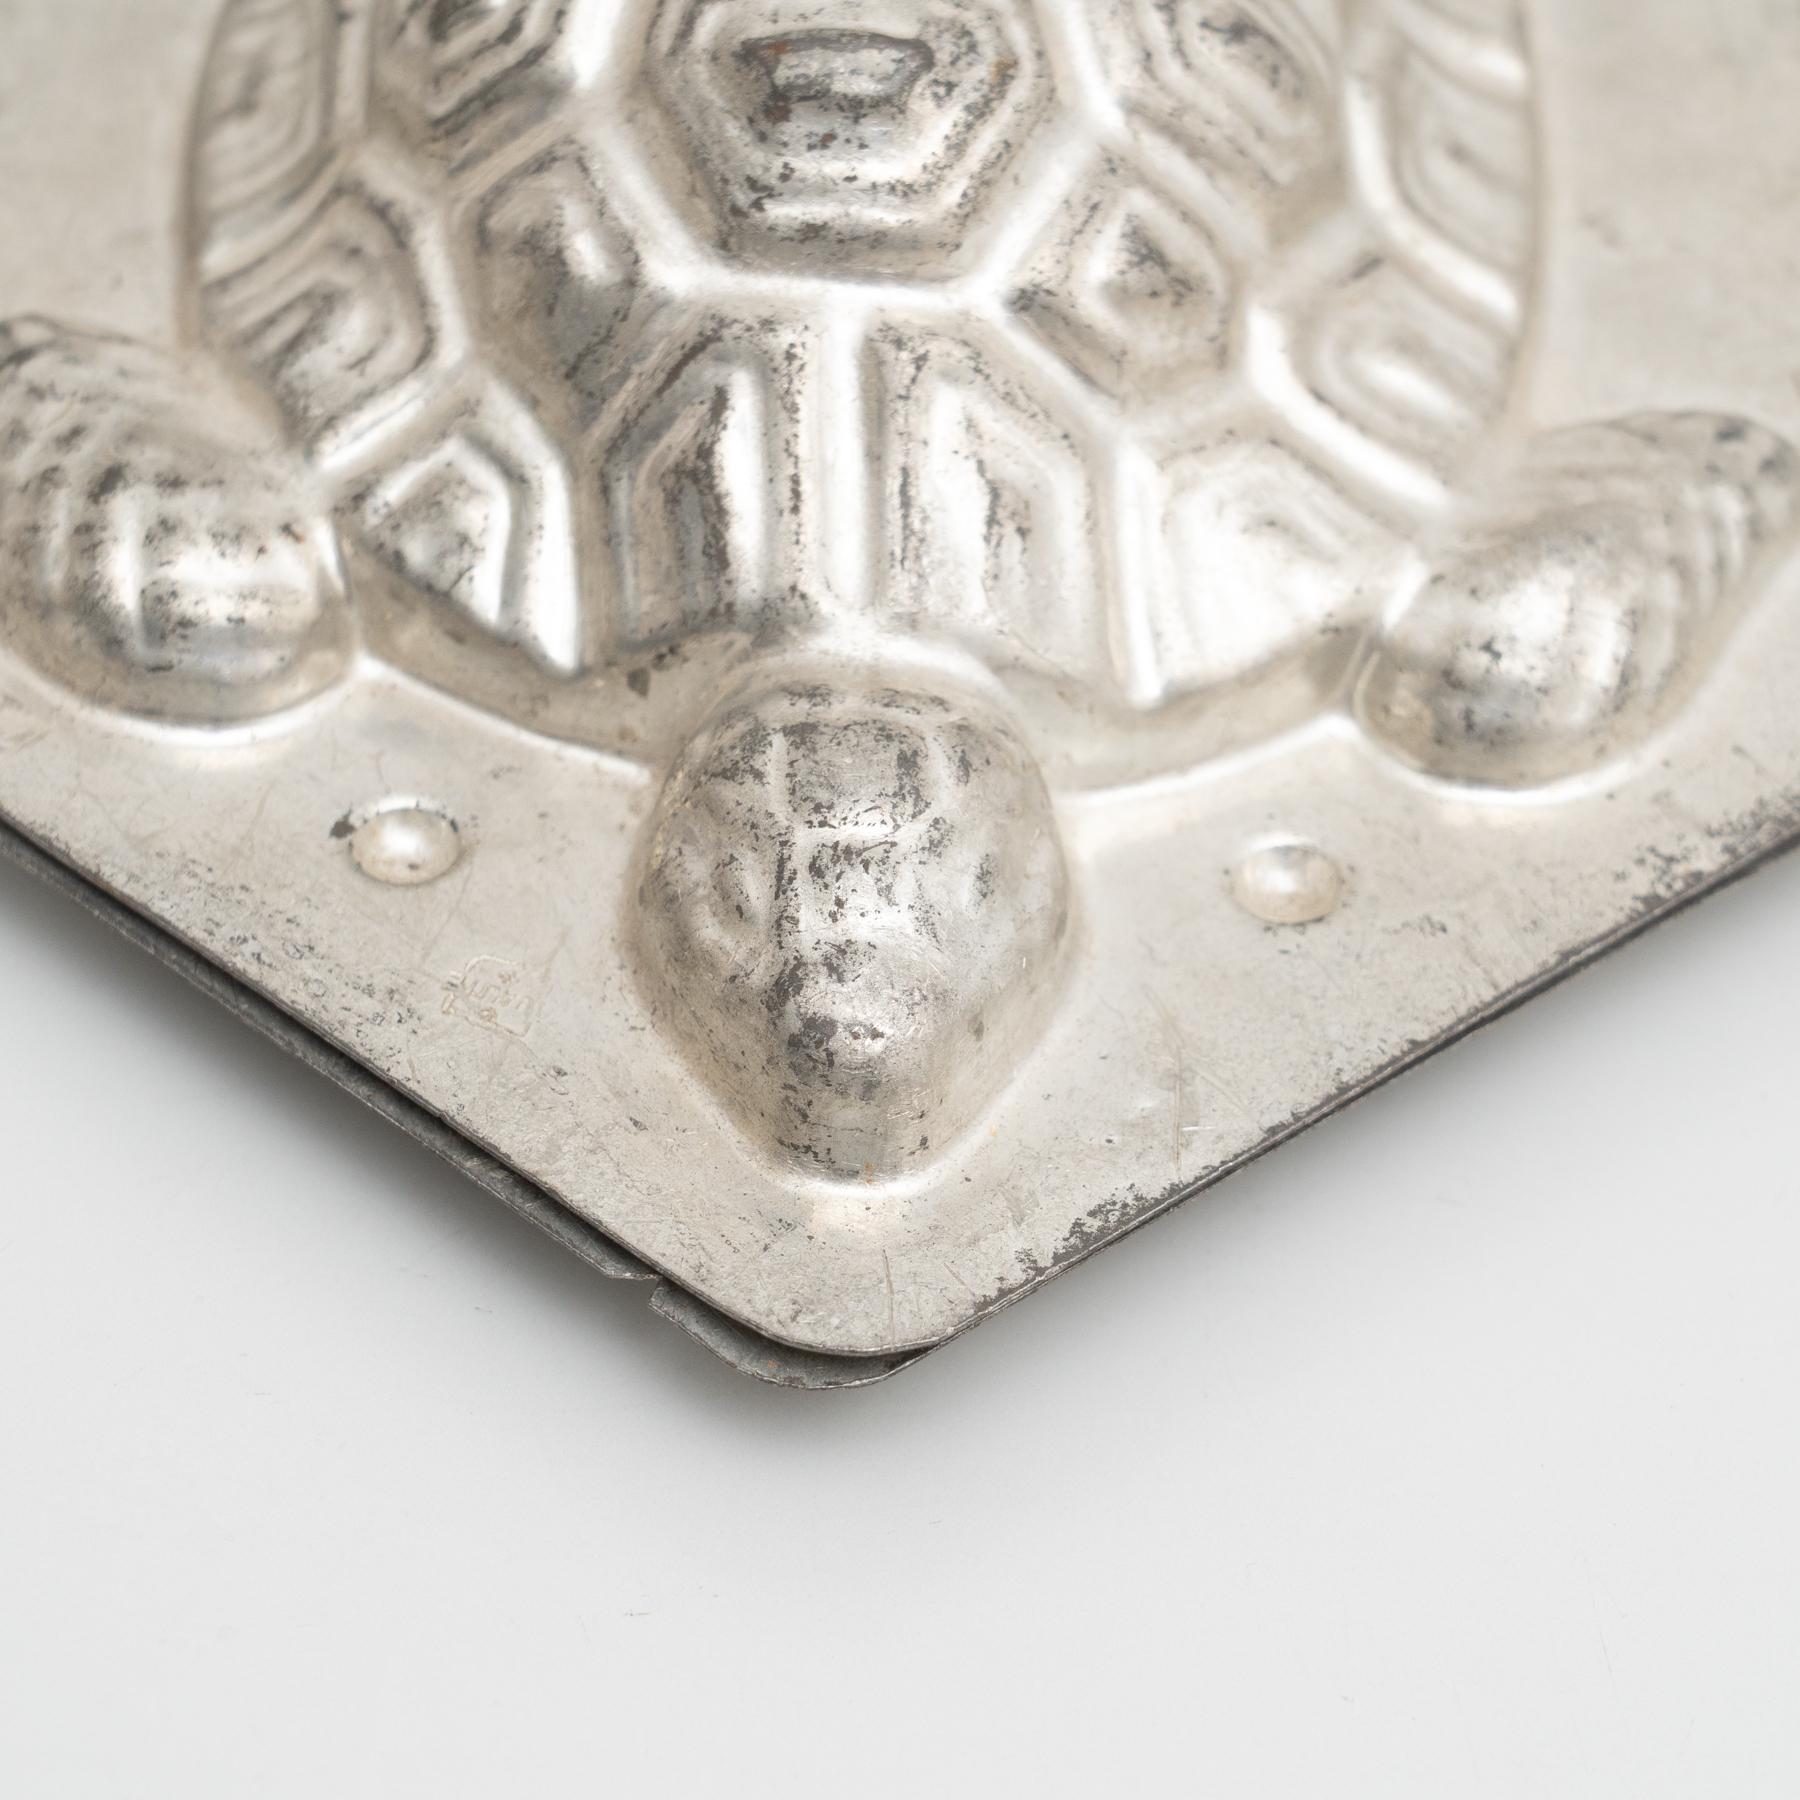 Antique Turtle Shaped Metal Cooking Mold, circa 1950 For Sale 9